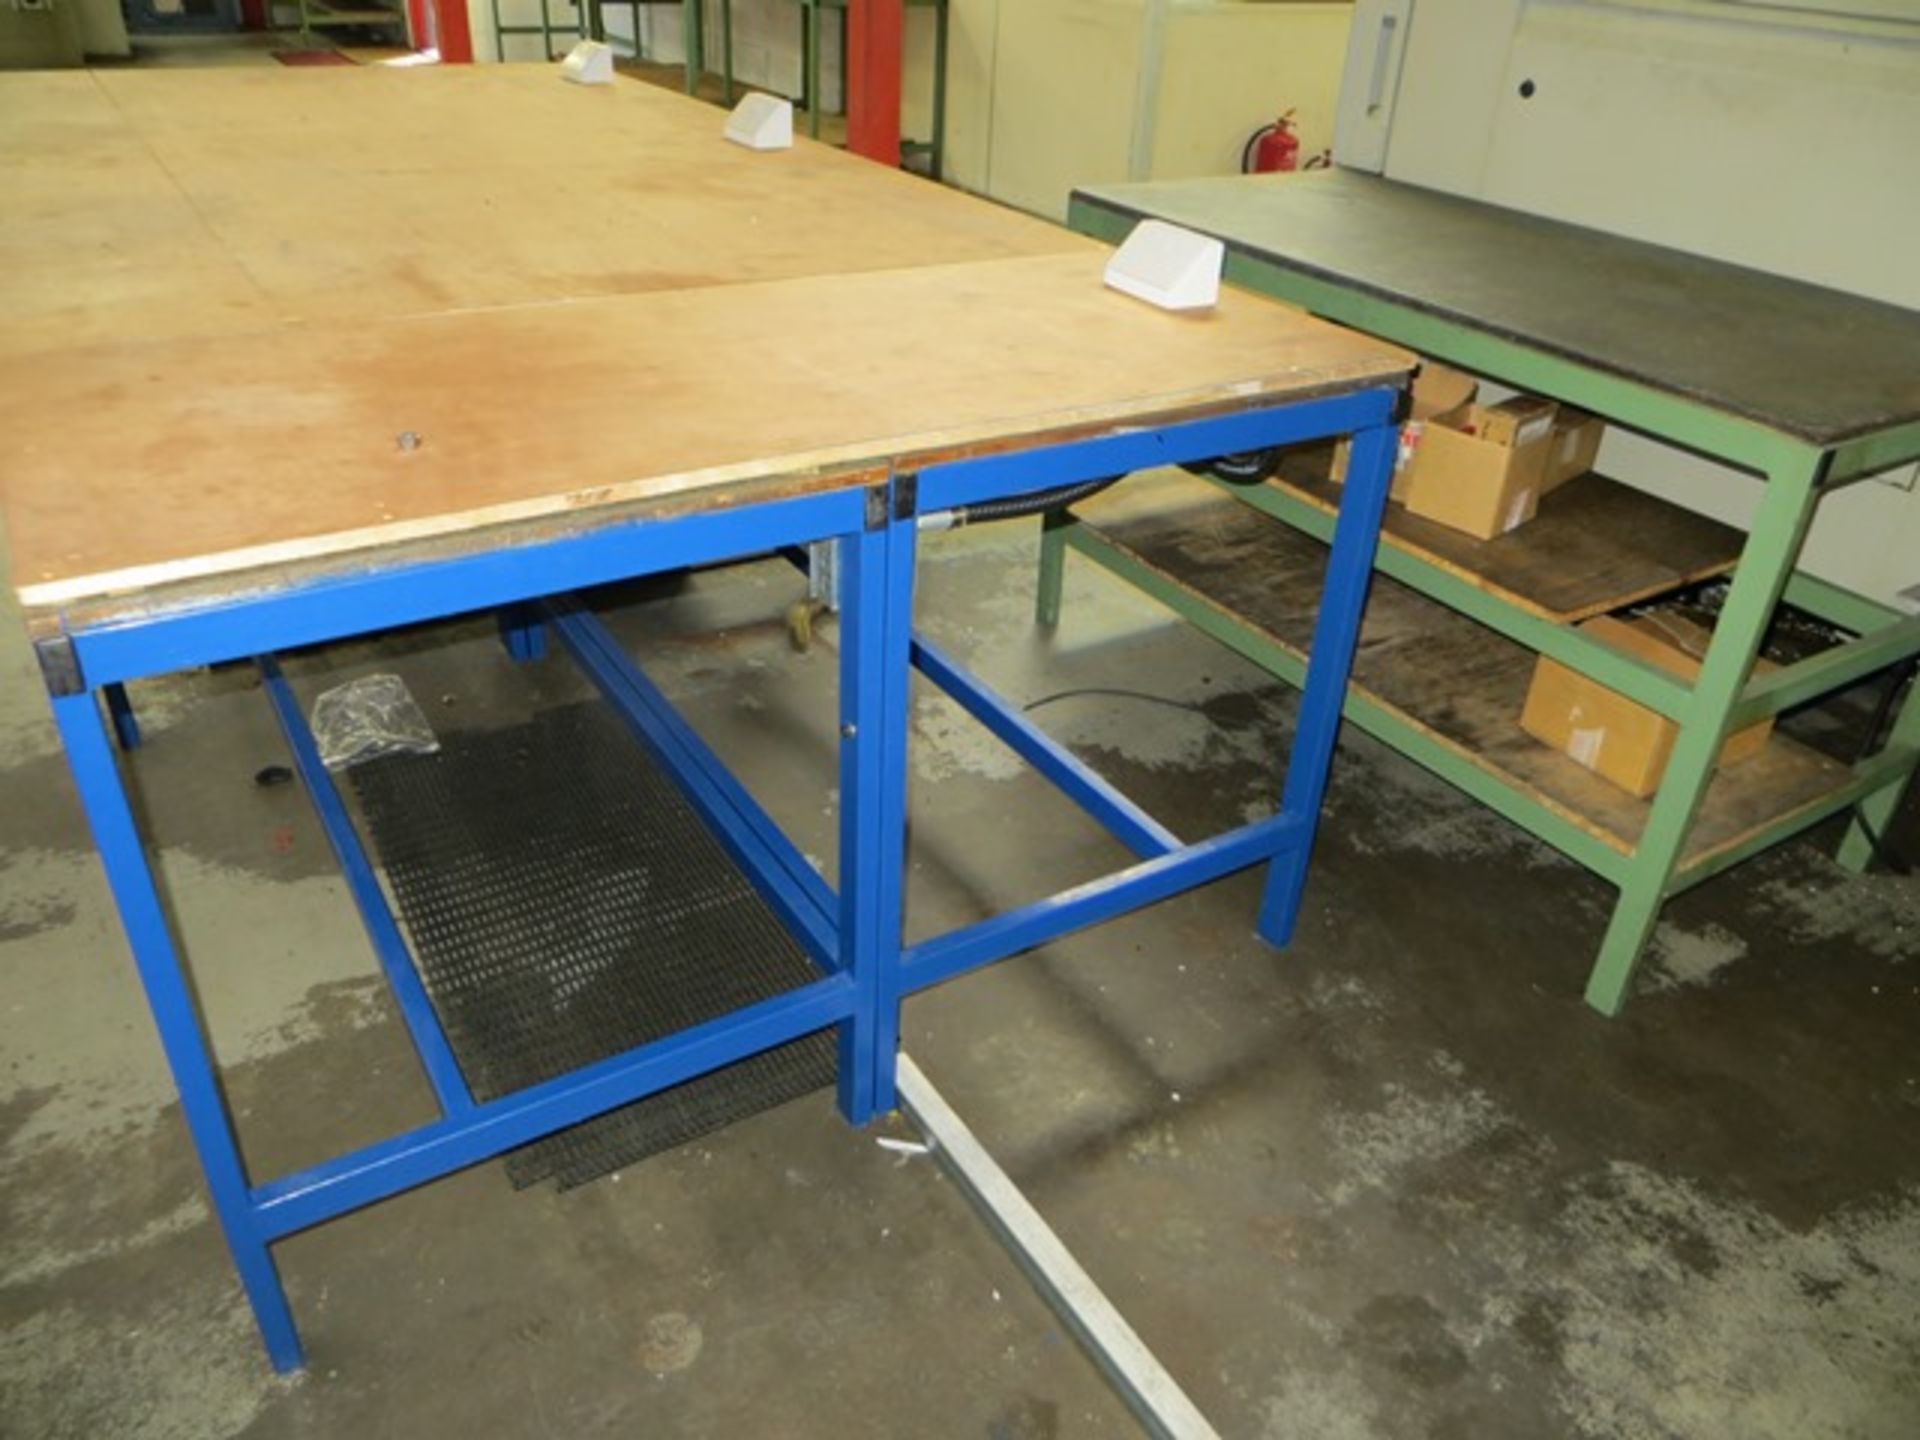 Five workbenches c/w power supplies. *A work Method Statement and Risk Assessment must be reviewed - Image 4 of 4